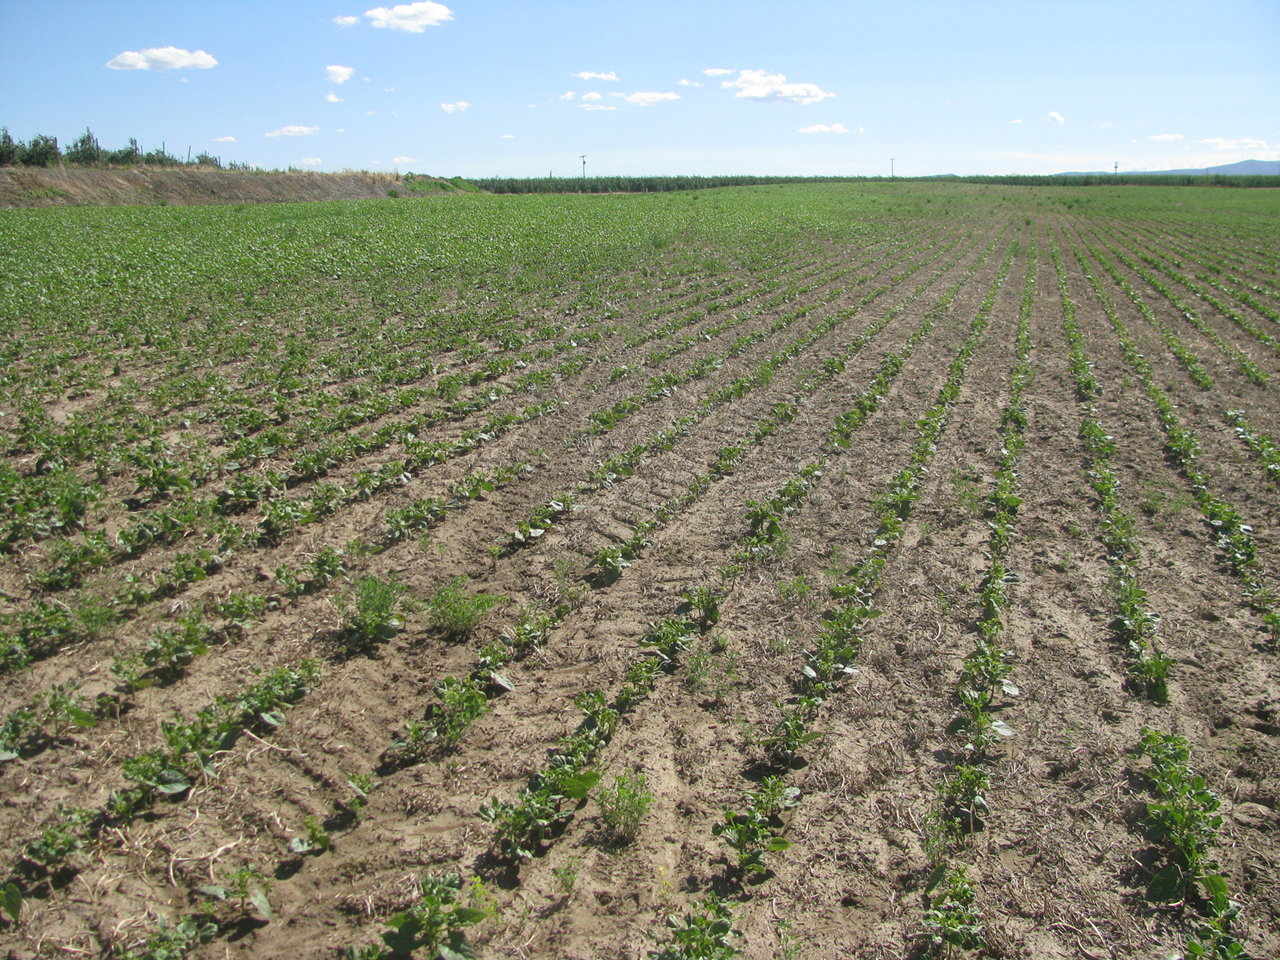 Severe injury to a pinto bean crop from Outlook, an acetanilide herbicide. Notice the unifoliate leaves typically are asymptomatic, whereas the trifoliate leaves have a puckered, drawstring appearance. Injury from Outlook can be affected by soil texture, compaction, temperature, etc., resulting in non-uniform distribution of symptomatic plants in a field.